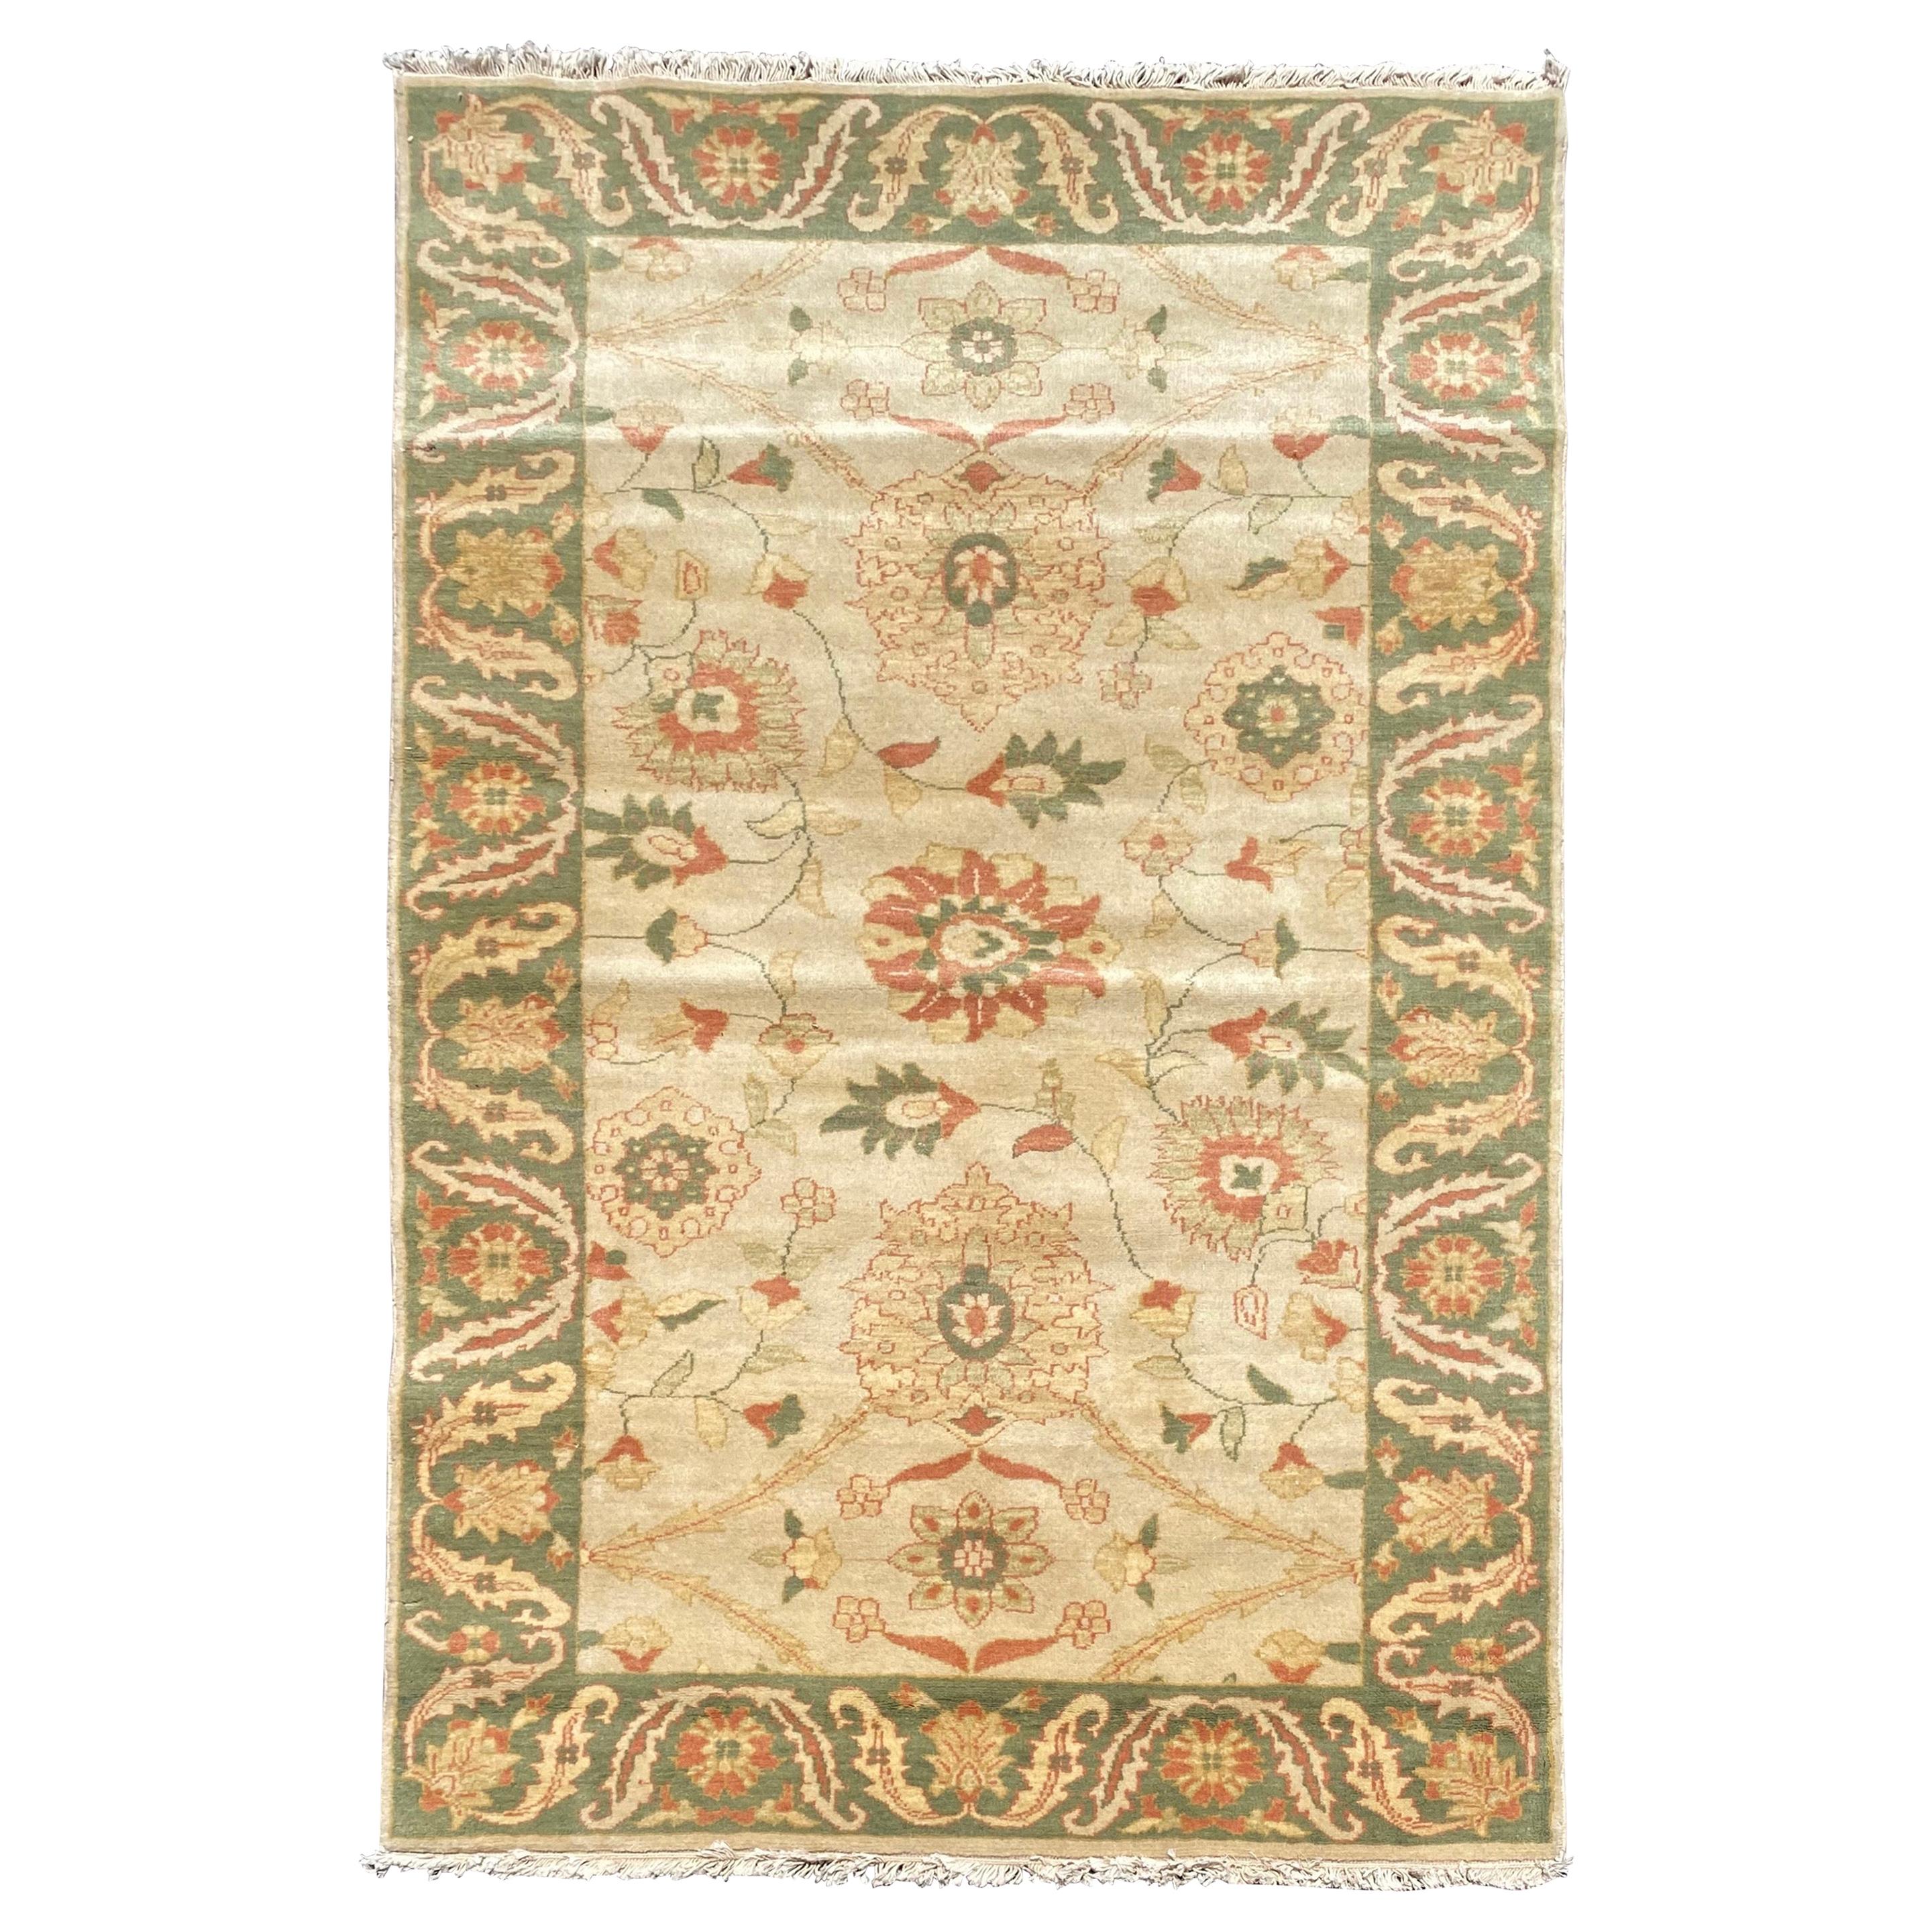 Late 20th Century Green Gold Ivory Beige Floral Persian Style Small Area Rug